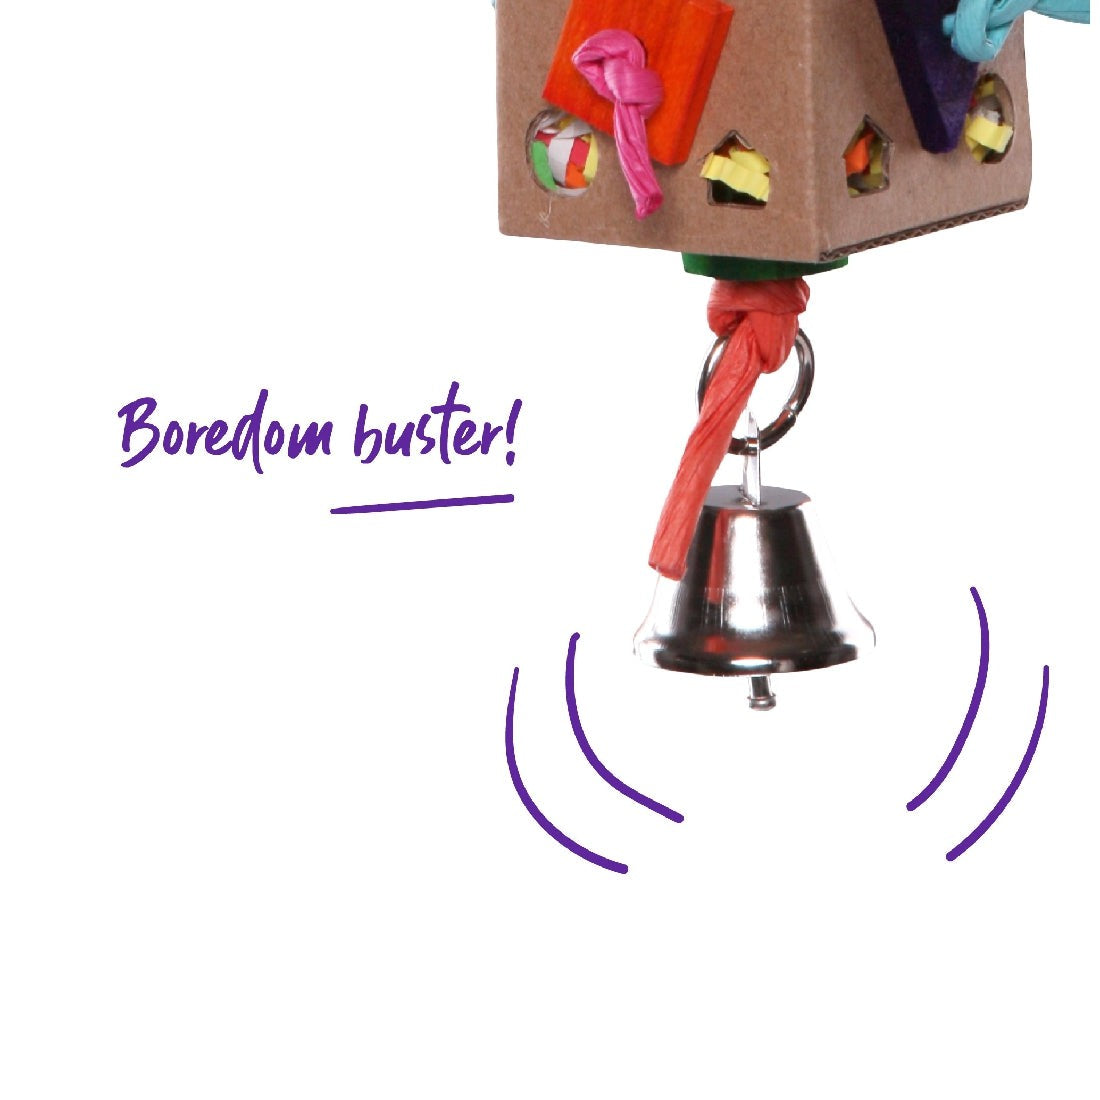 Cardboard bird toy with colorful knots and bell labeled "Boredom buster!"